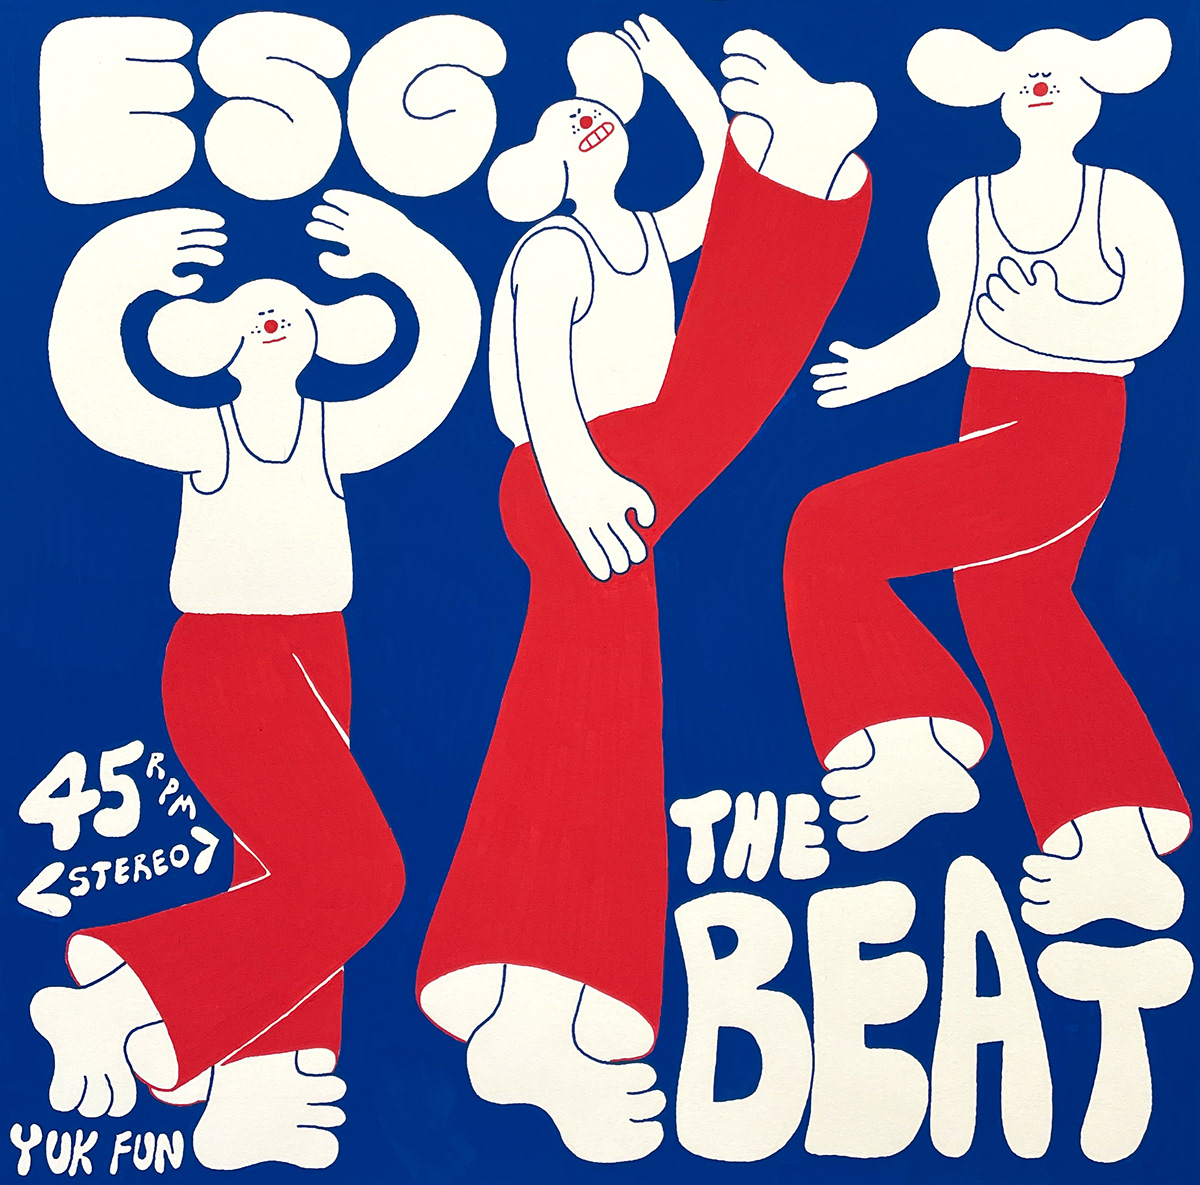 A record cover with illustrations of 3 animal characters dancing on it. It says "ESG The Beat" on it